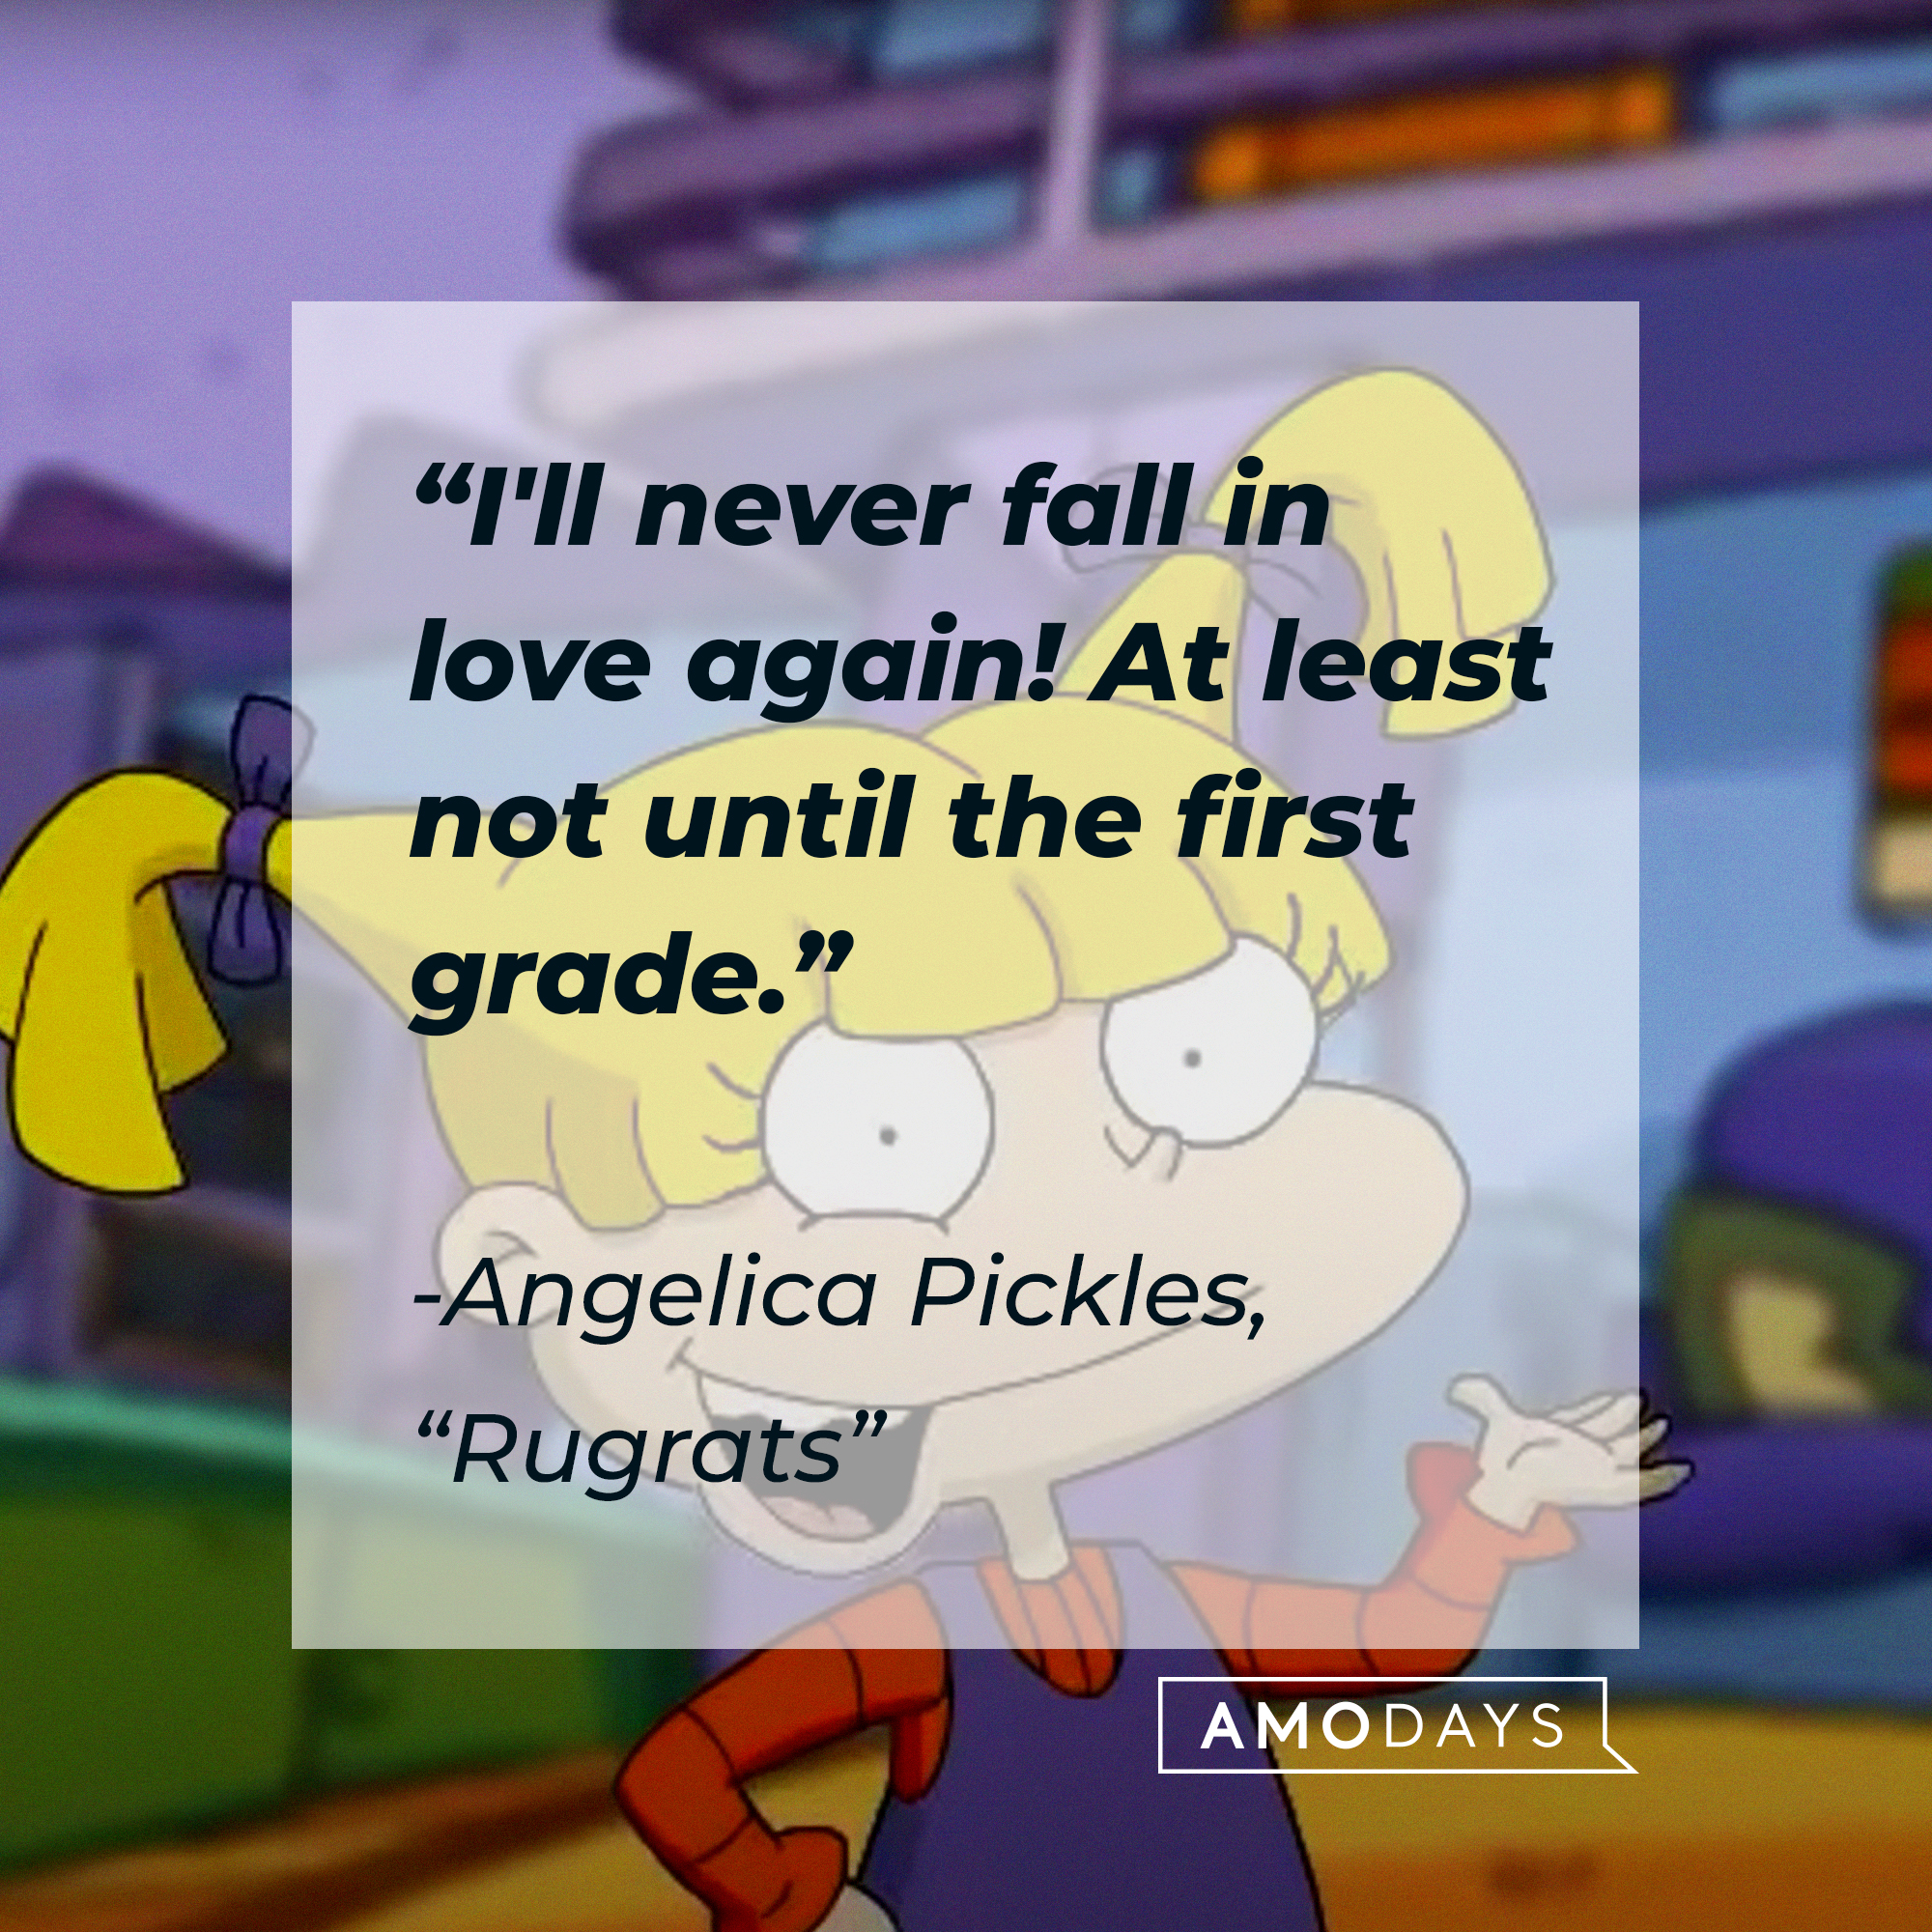 Angelica Pickles with her quote: “I'll never fall in love again! At least not until the first grade.” | Source: Facebook.com/Rugrats